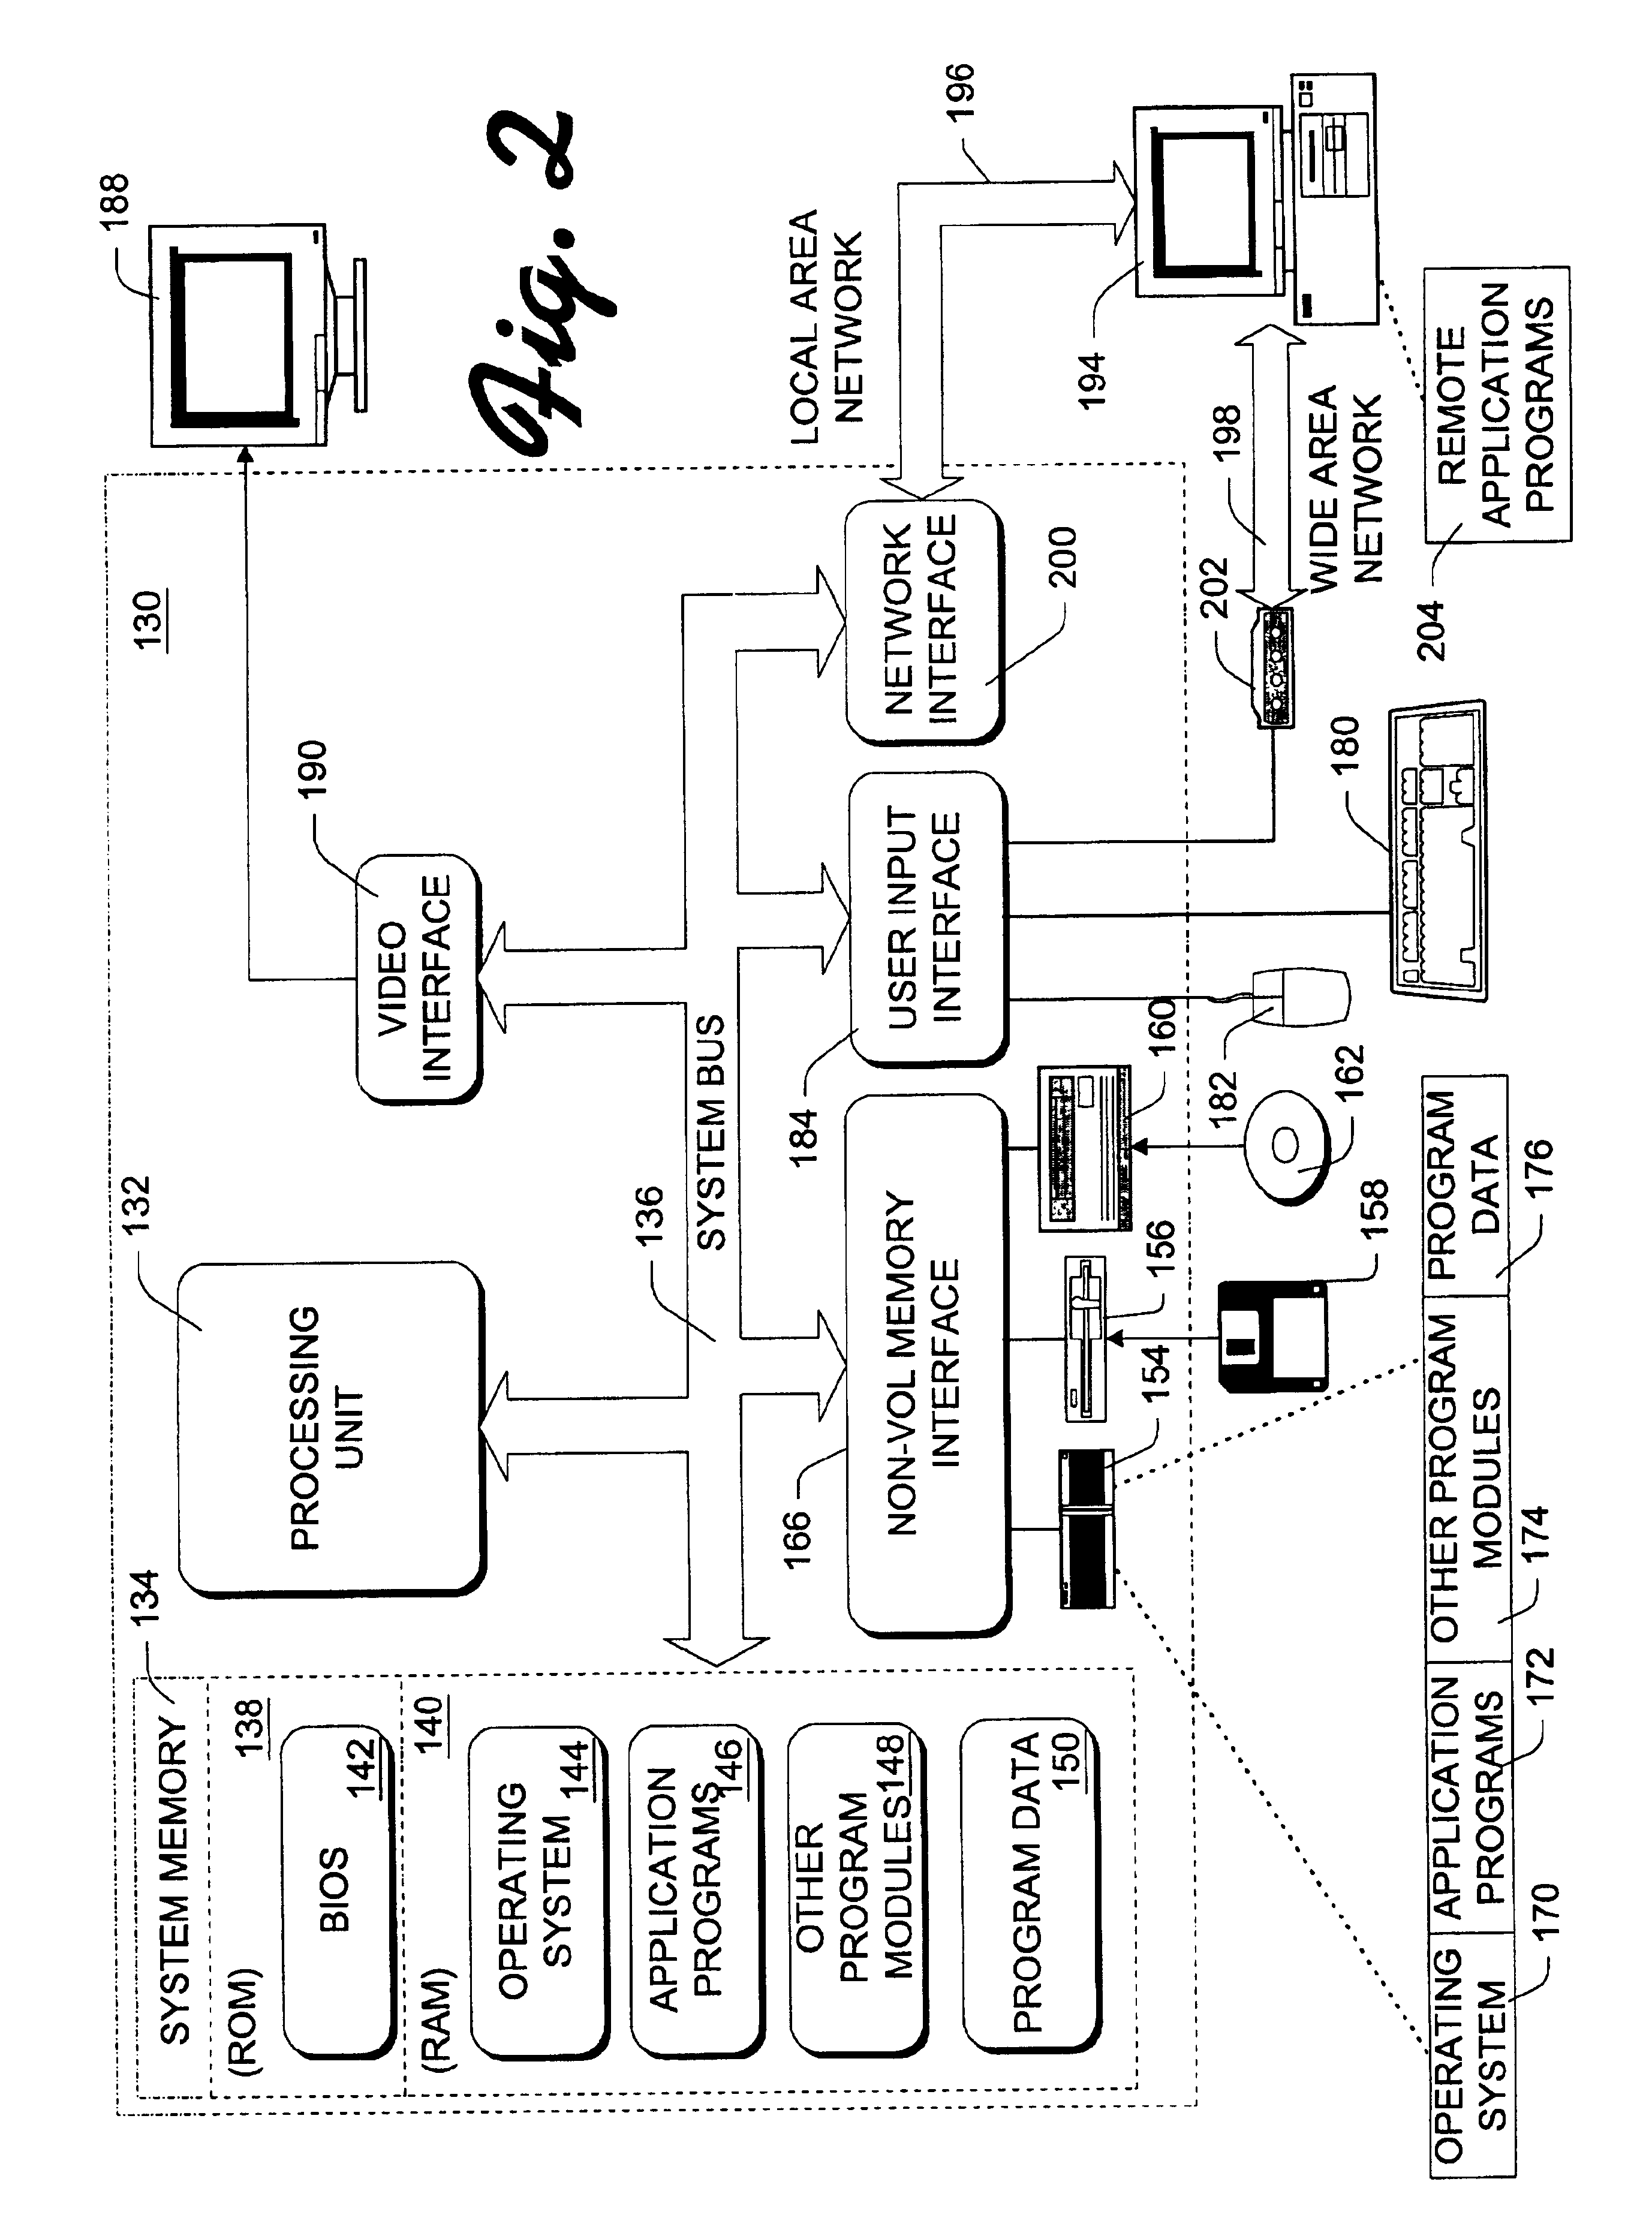 Service routing and web integration in a distributed multi-site user authentication system